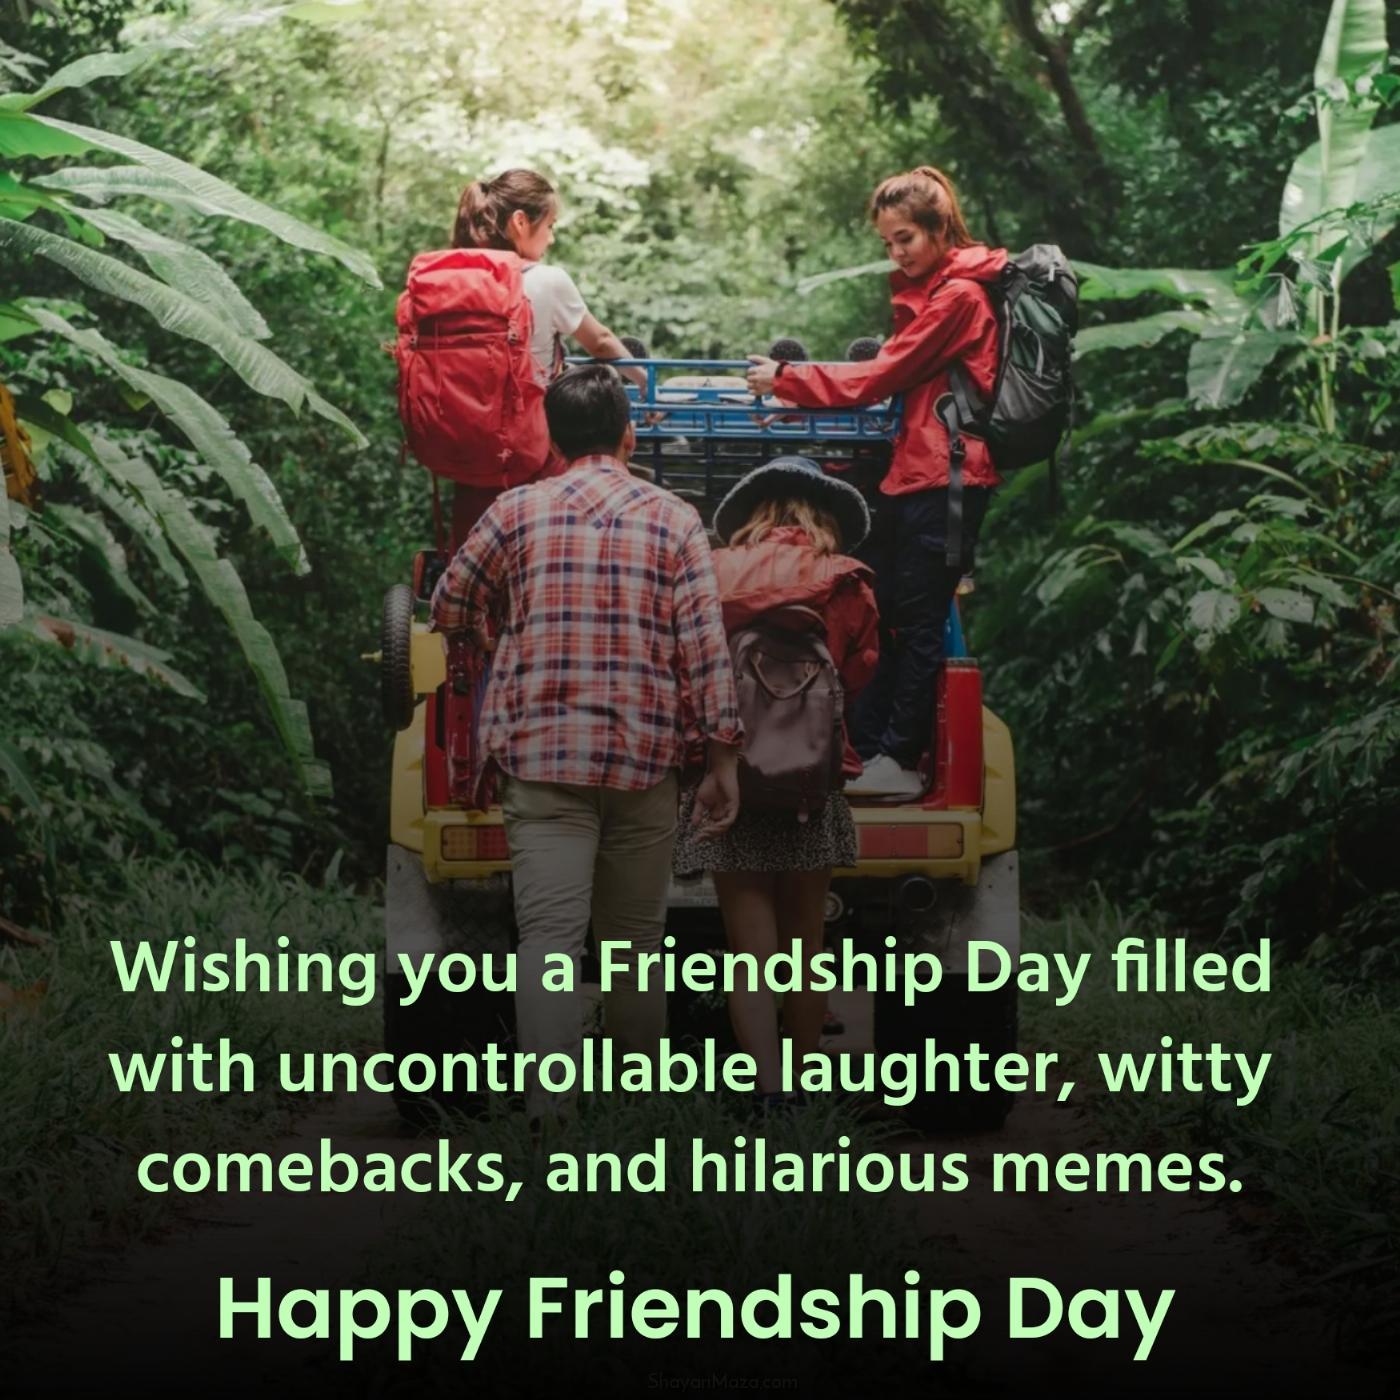 Wishing you a Friendship Day filled with uncontrollable laughter